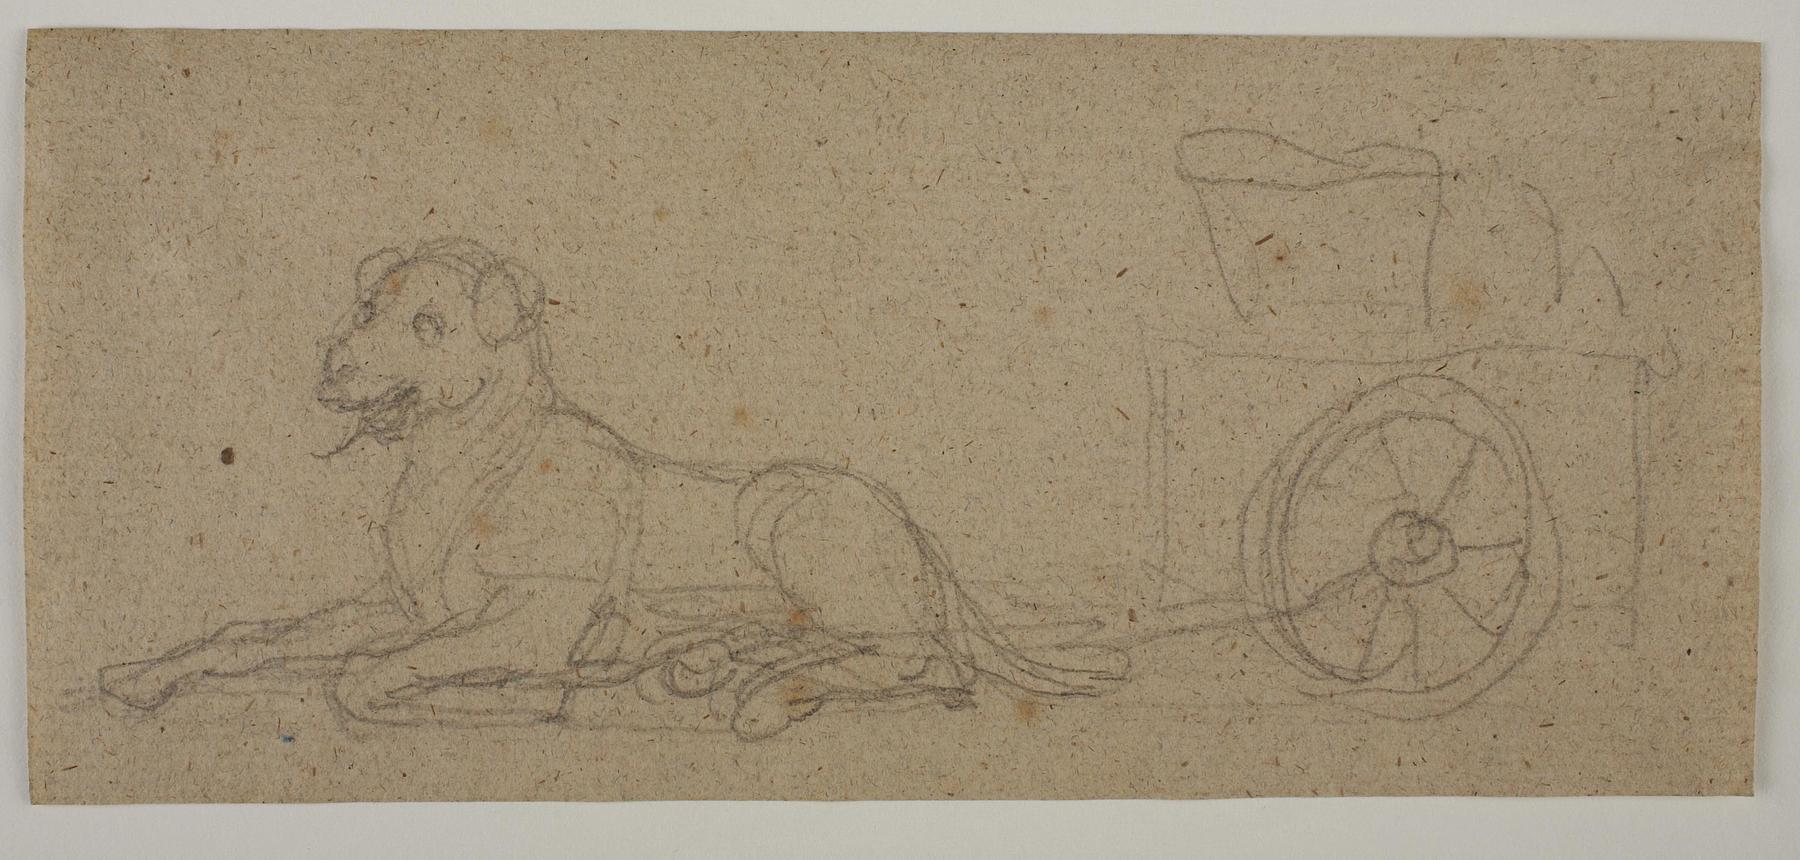 Dog hitched to a wagon, C1055